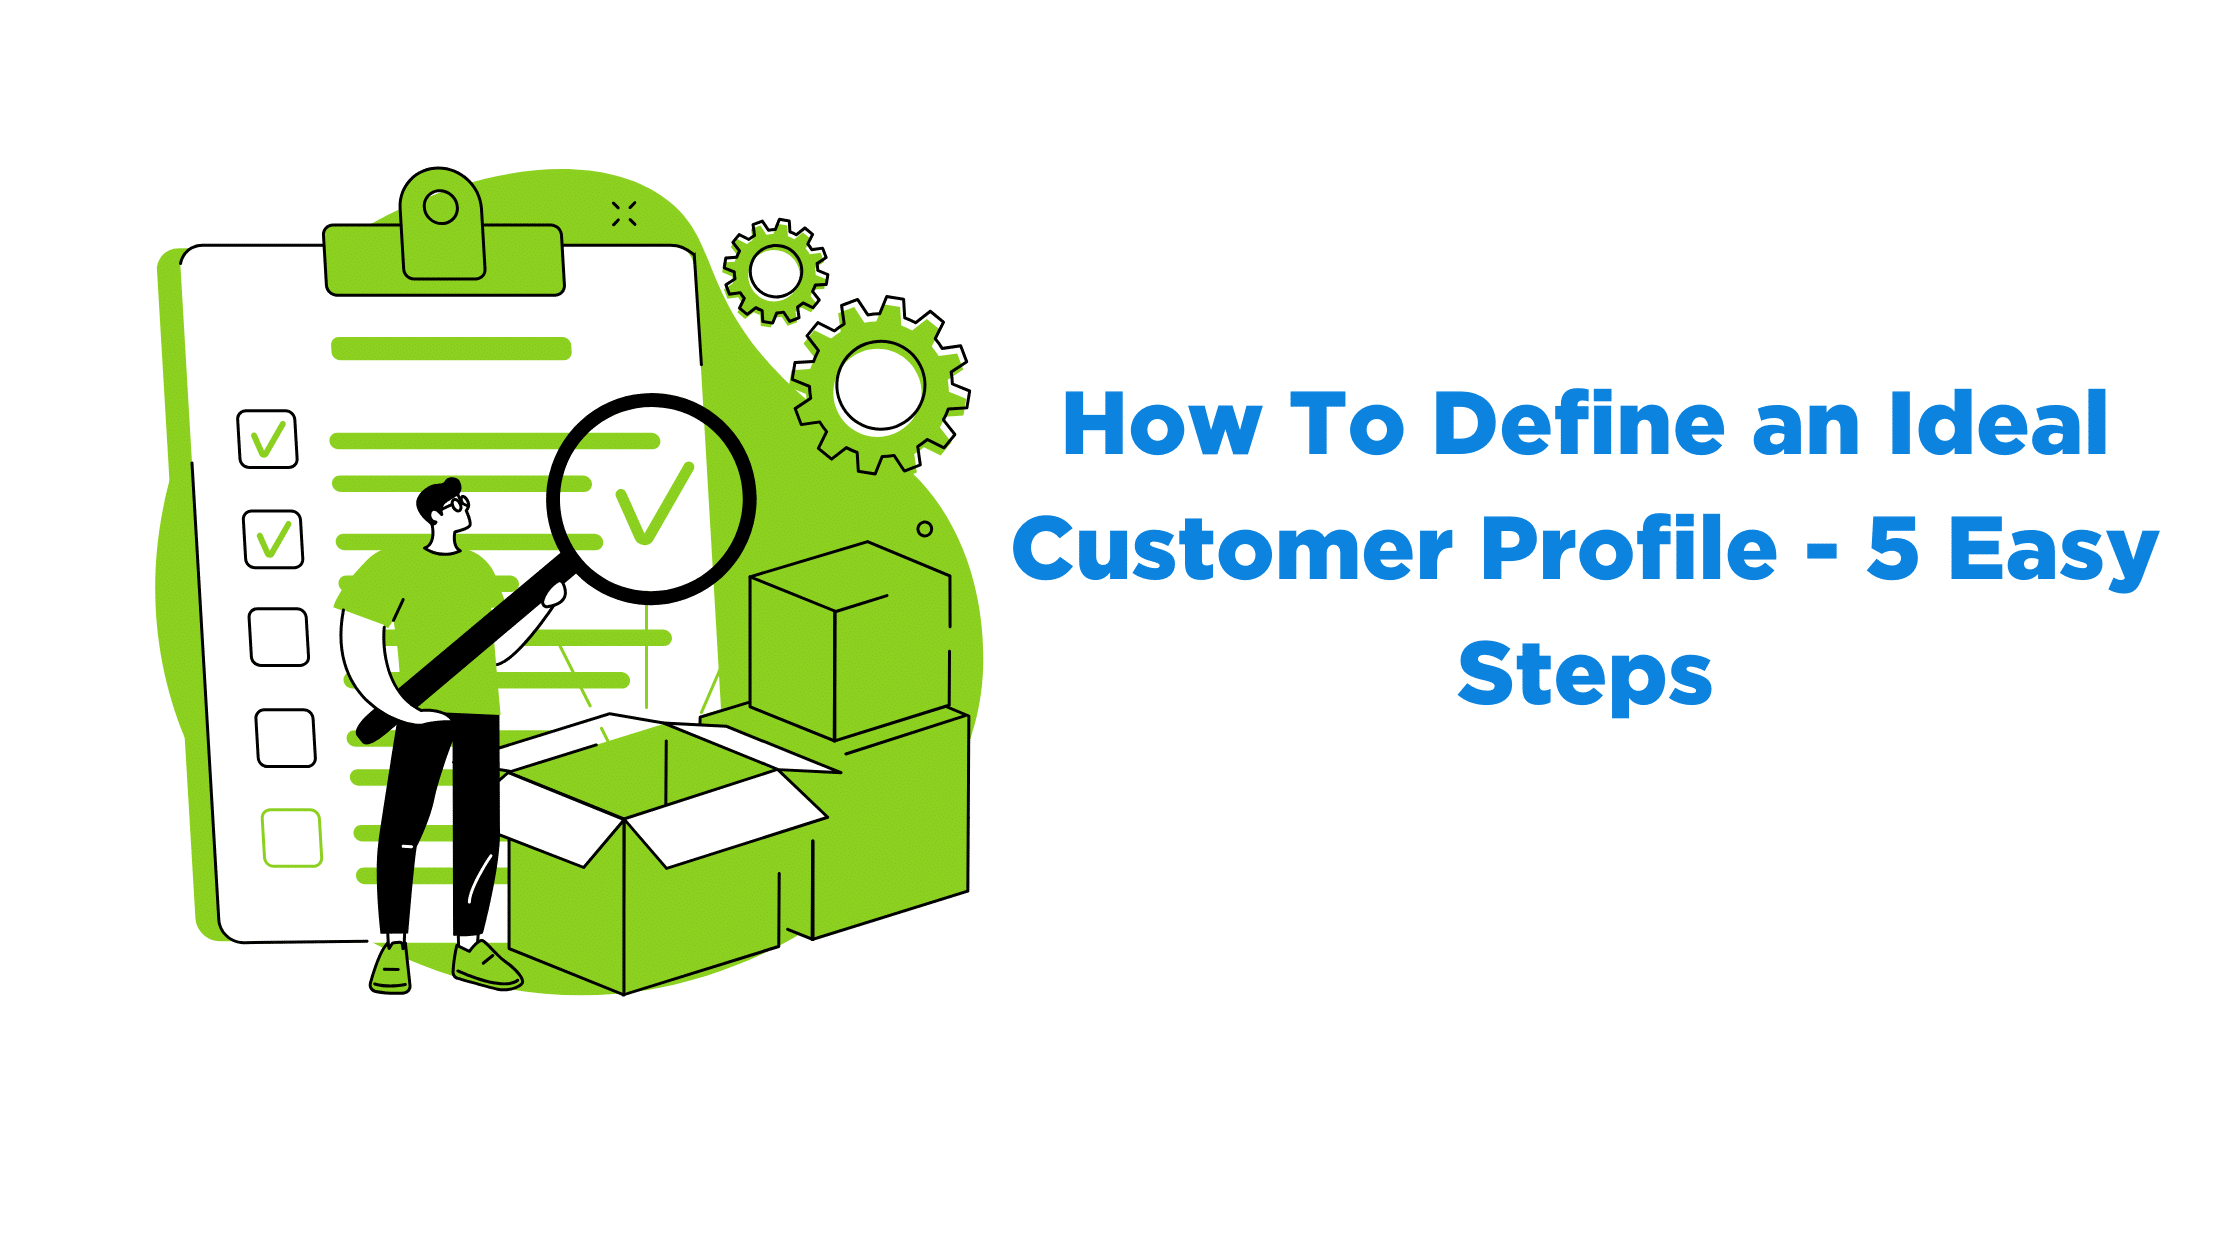 How To Define an Ideal Customer Profile - 5 Easy Steps